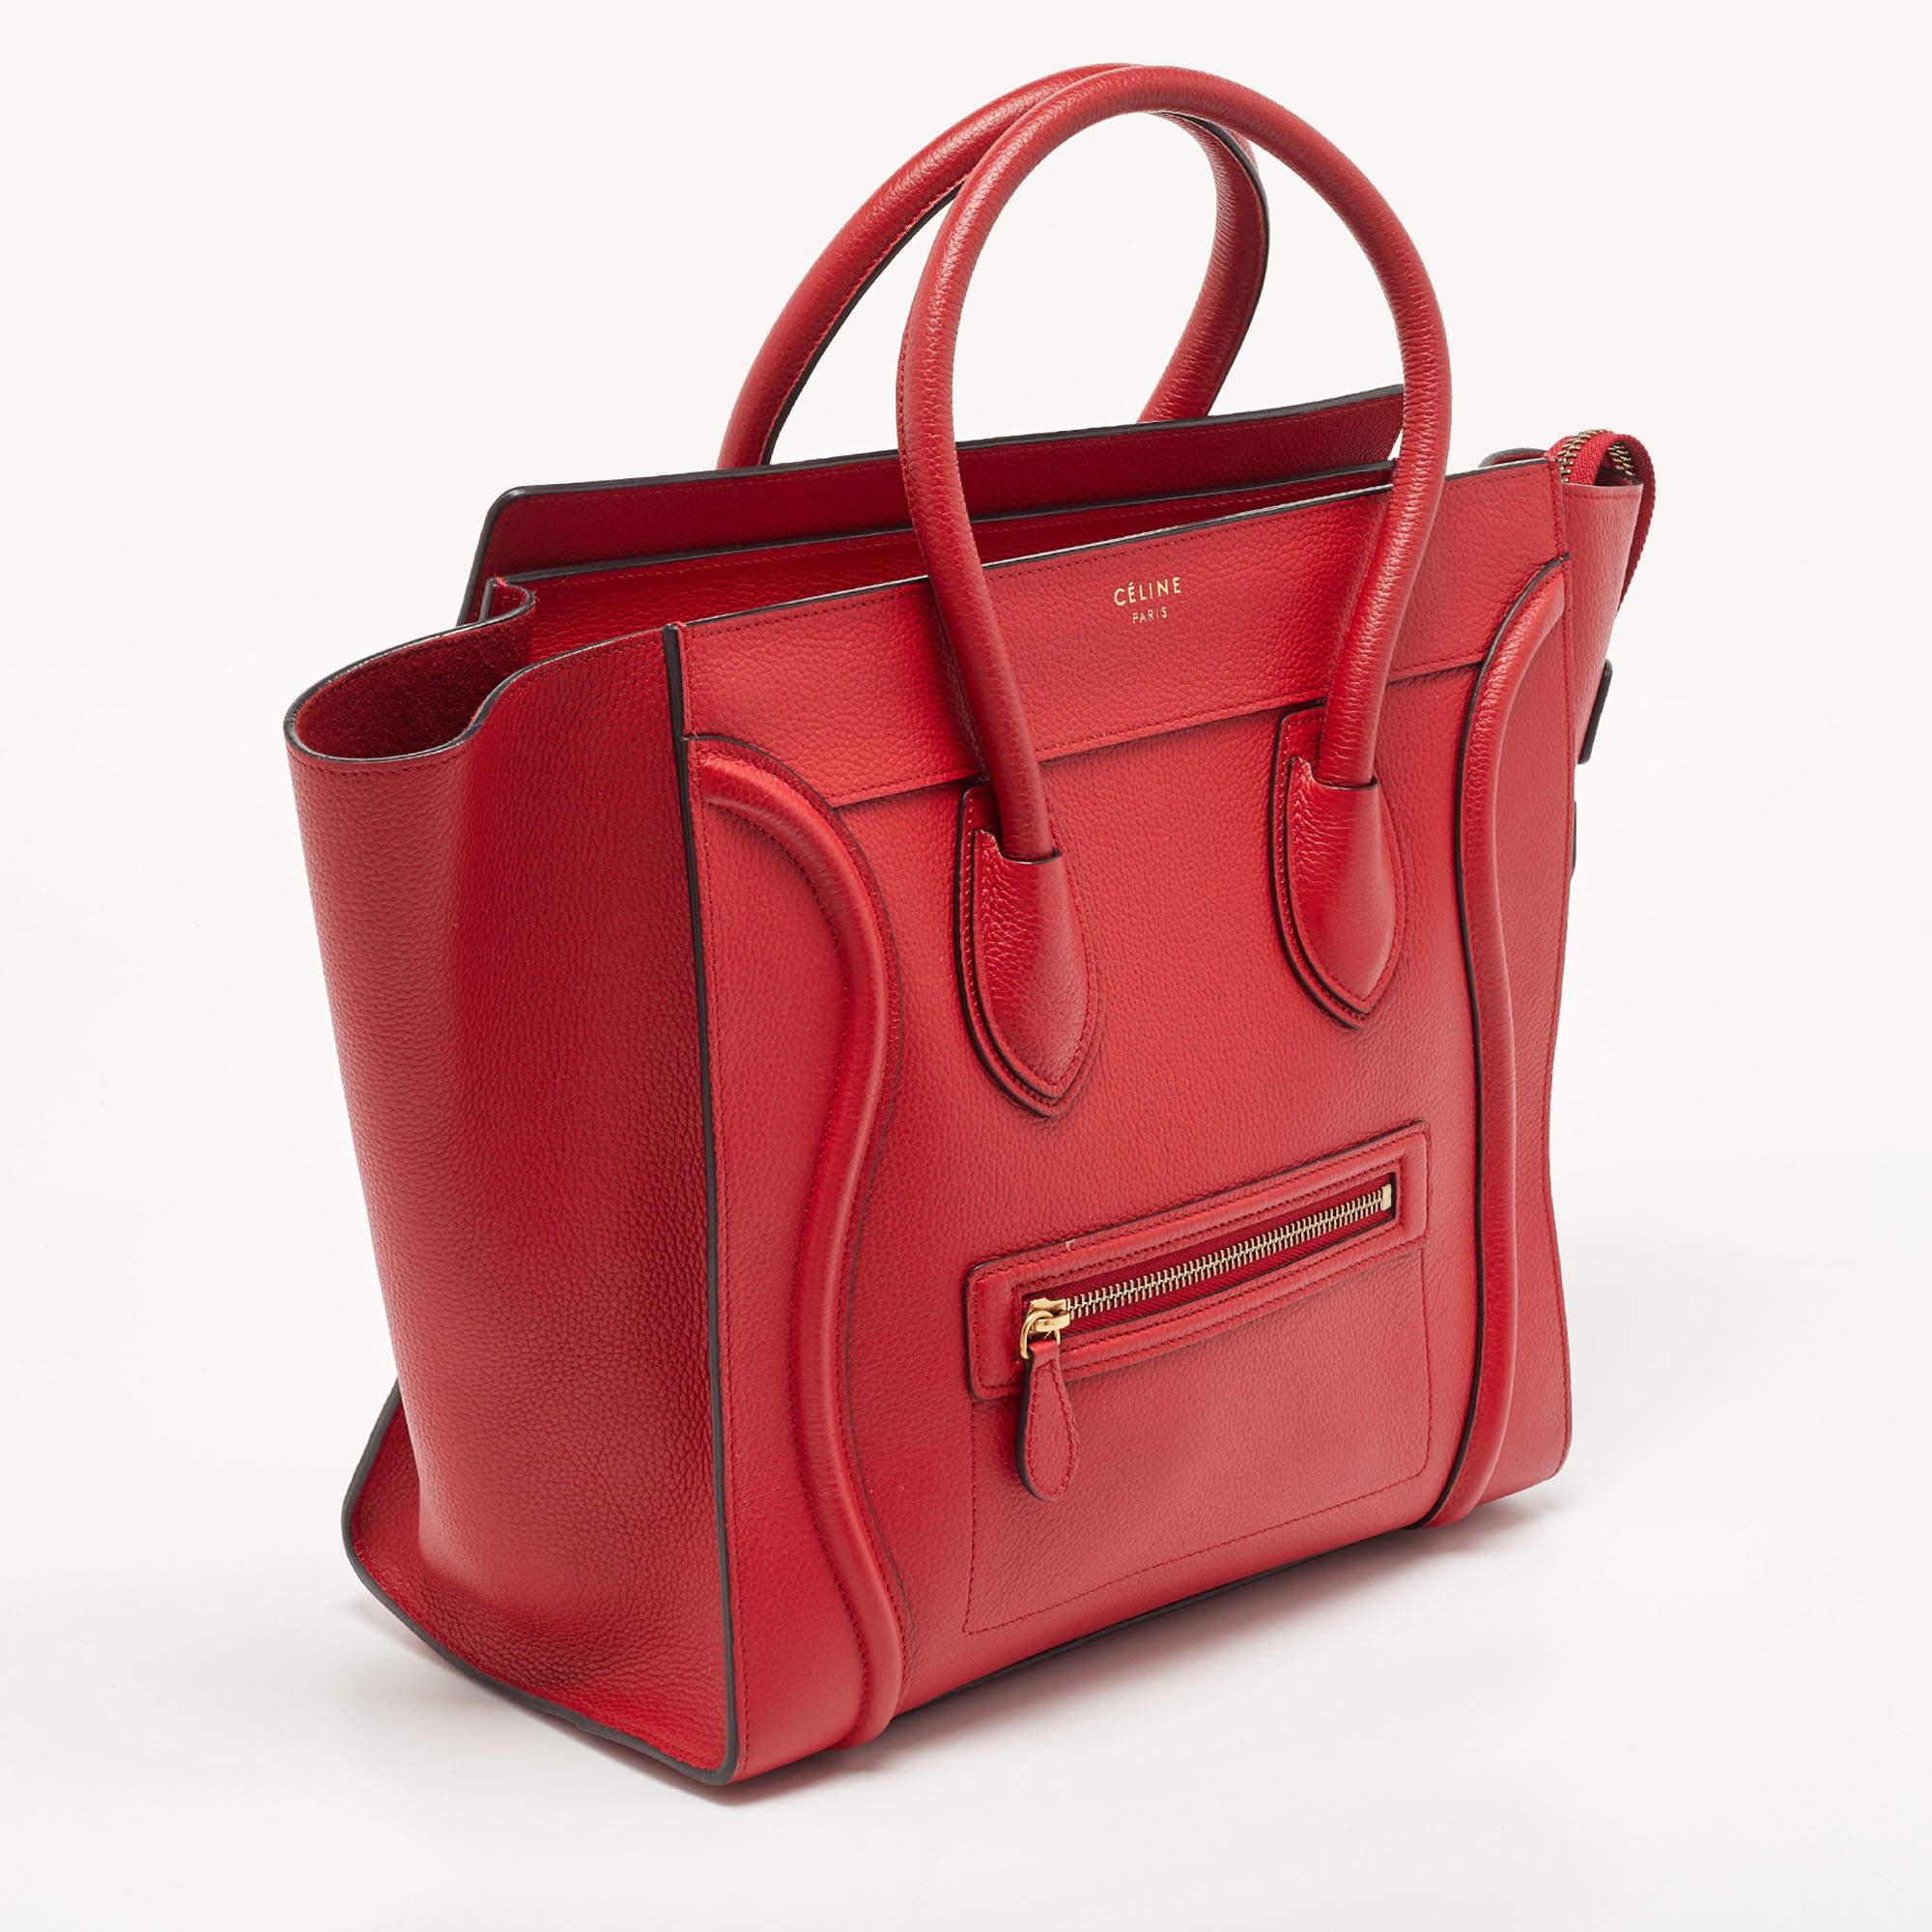 Women's Celine Red Leather Mini Luggage Tote